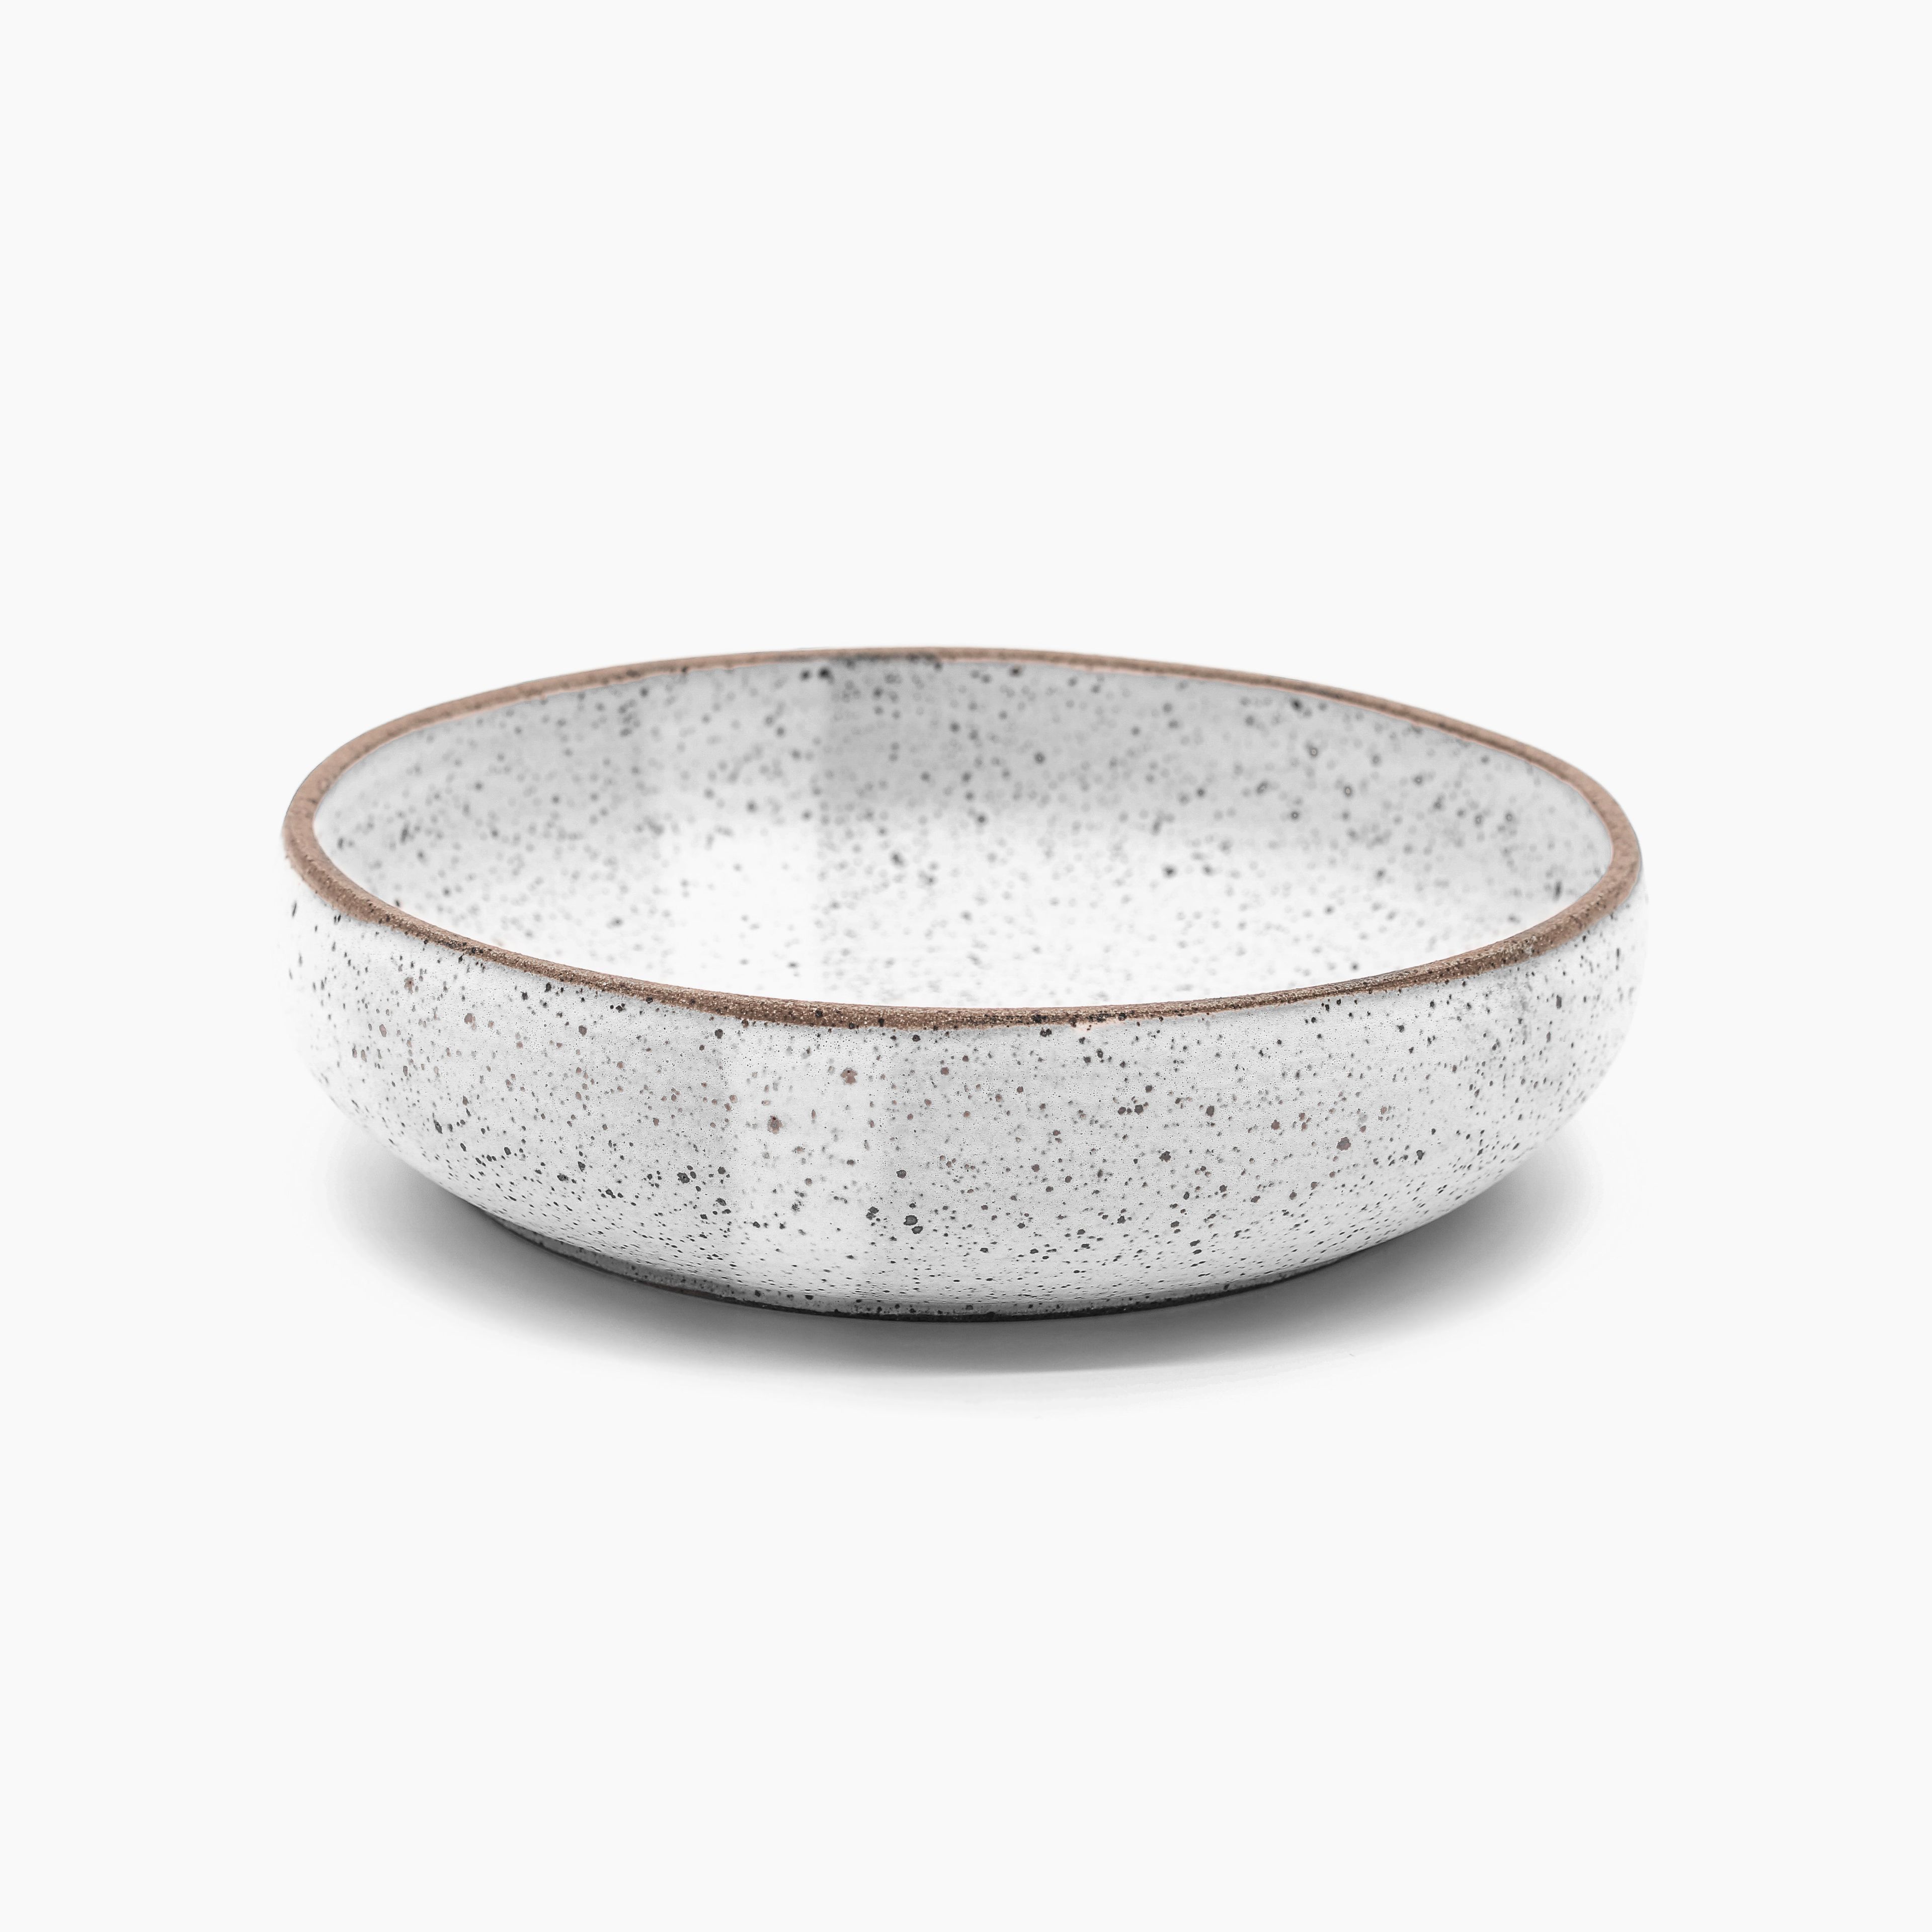 Serving Bowl [Exposed]